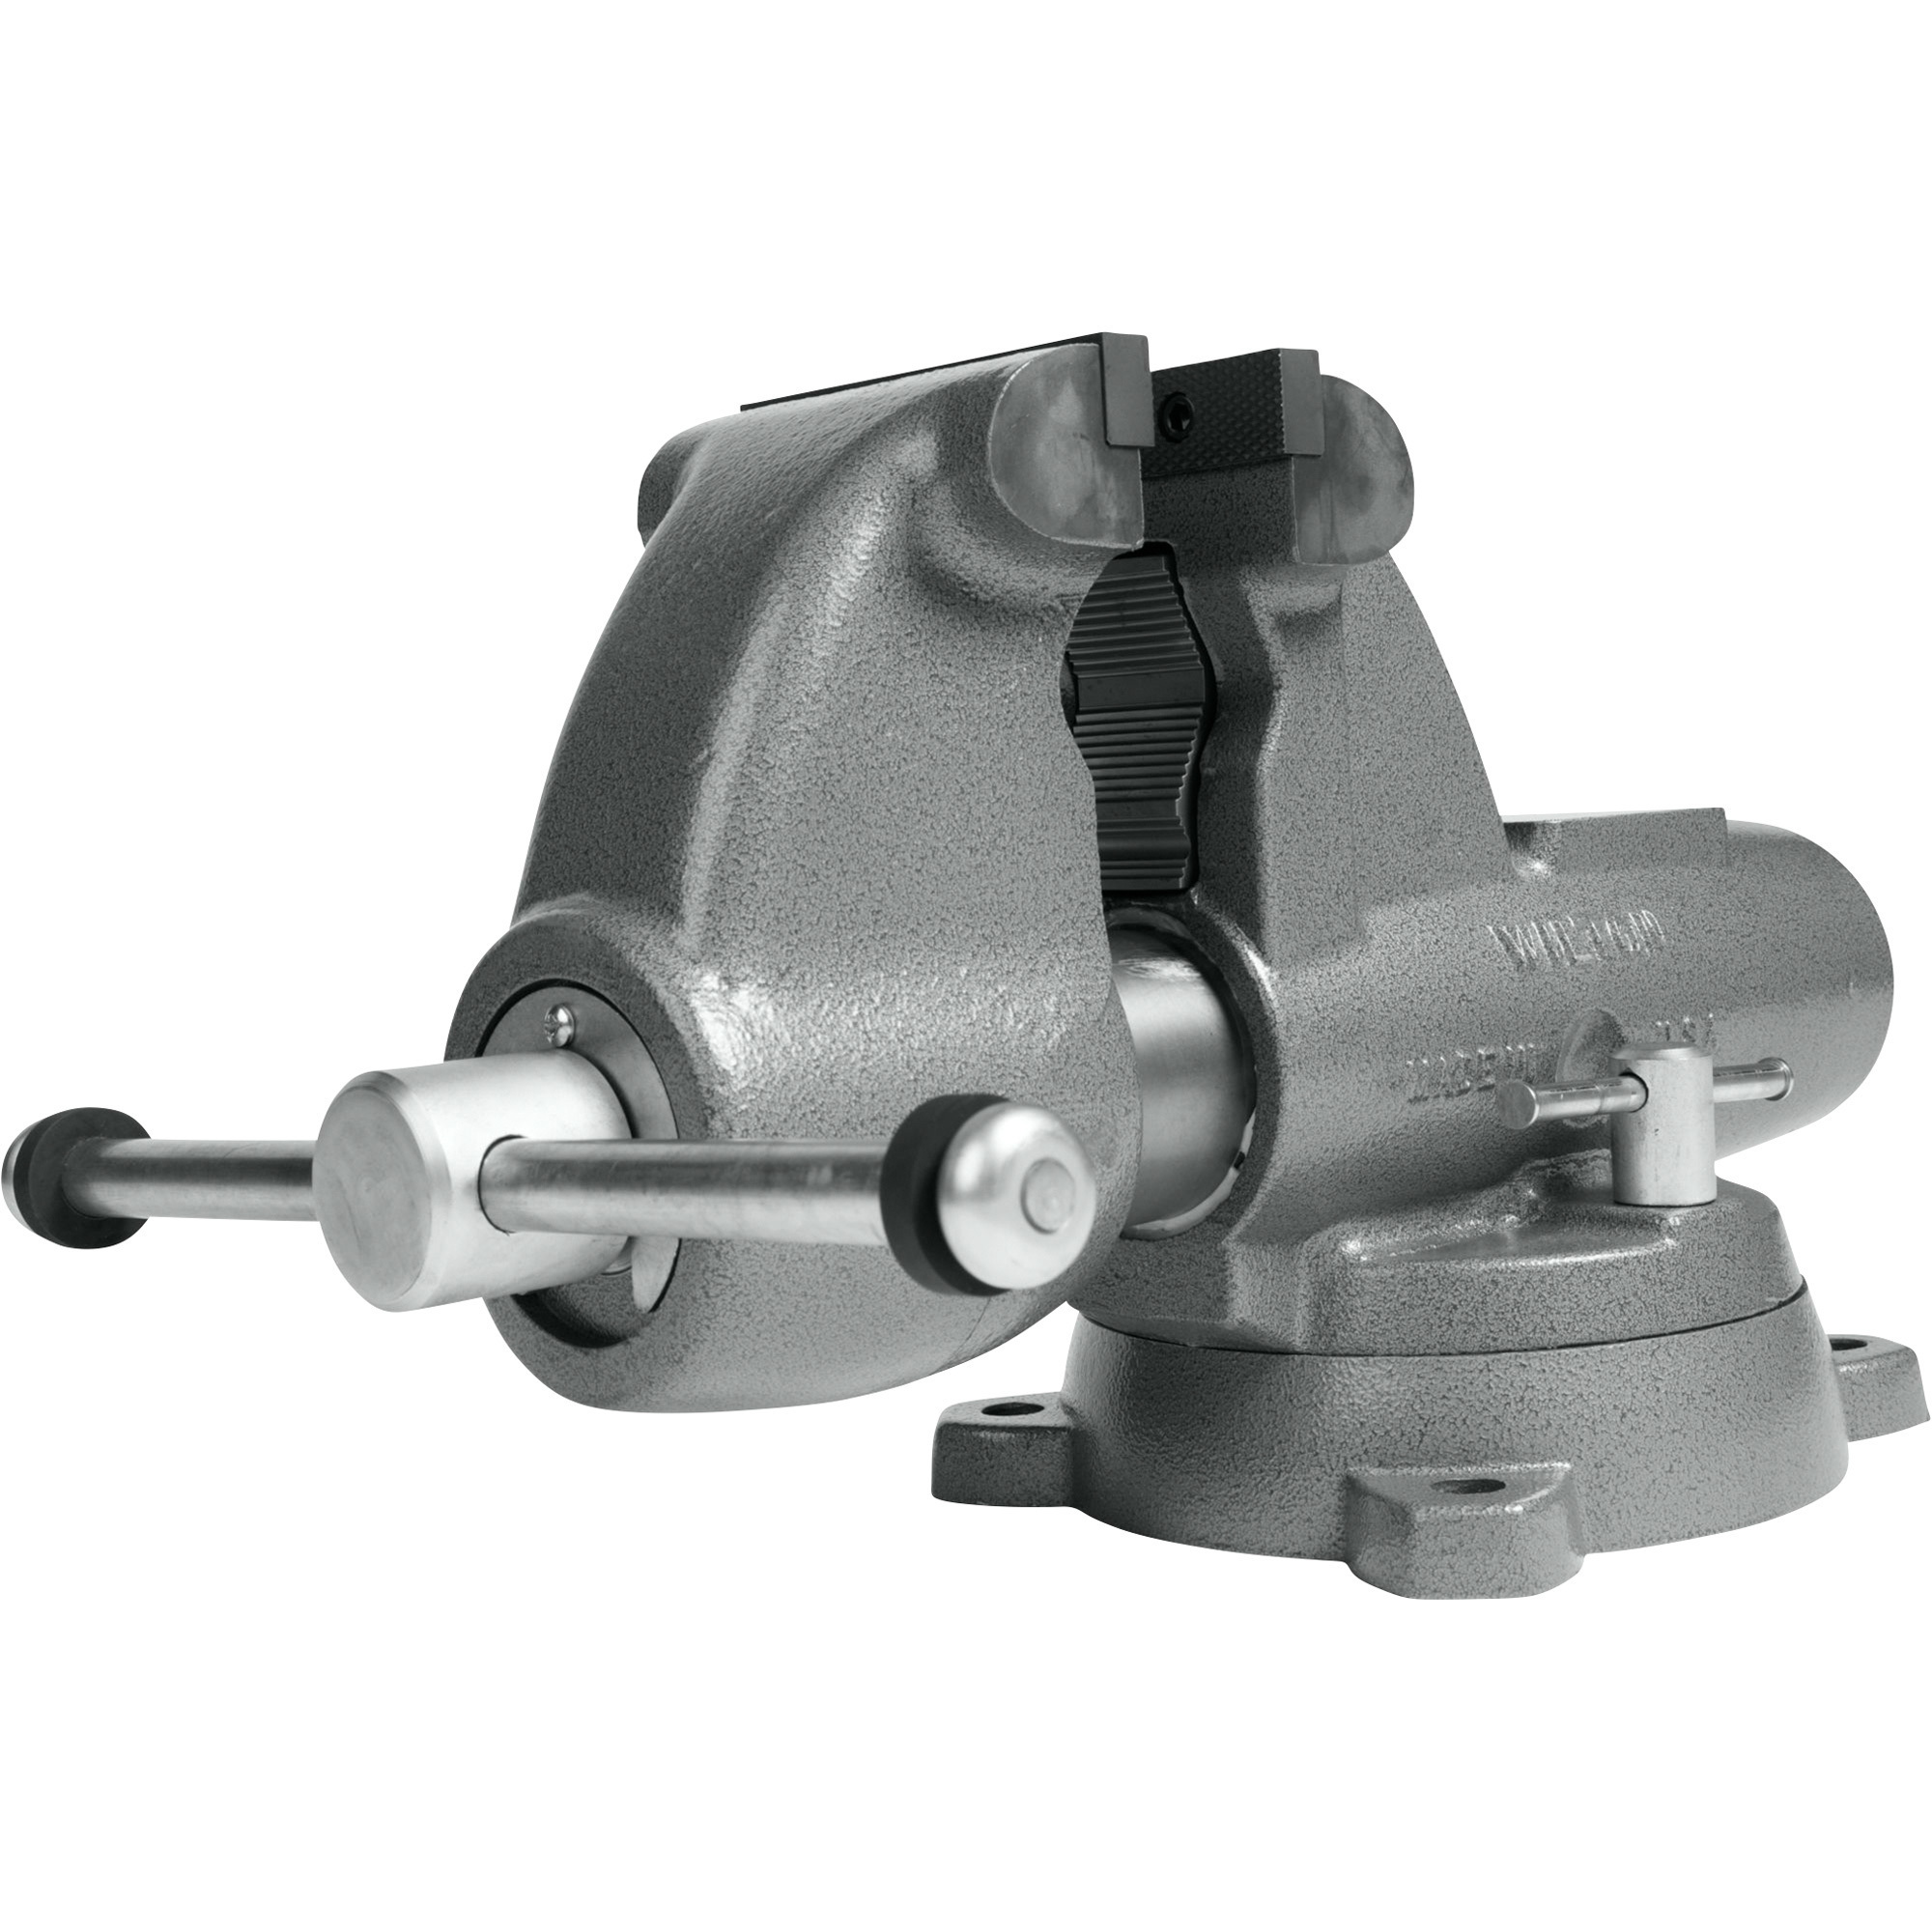 Wilton Combination Pipe and Bench Vise, 5Inch Jaw Width, Model C2